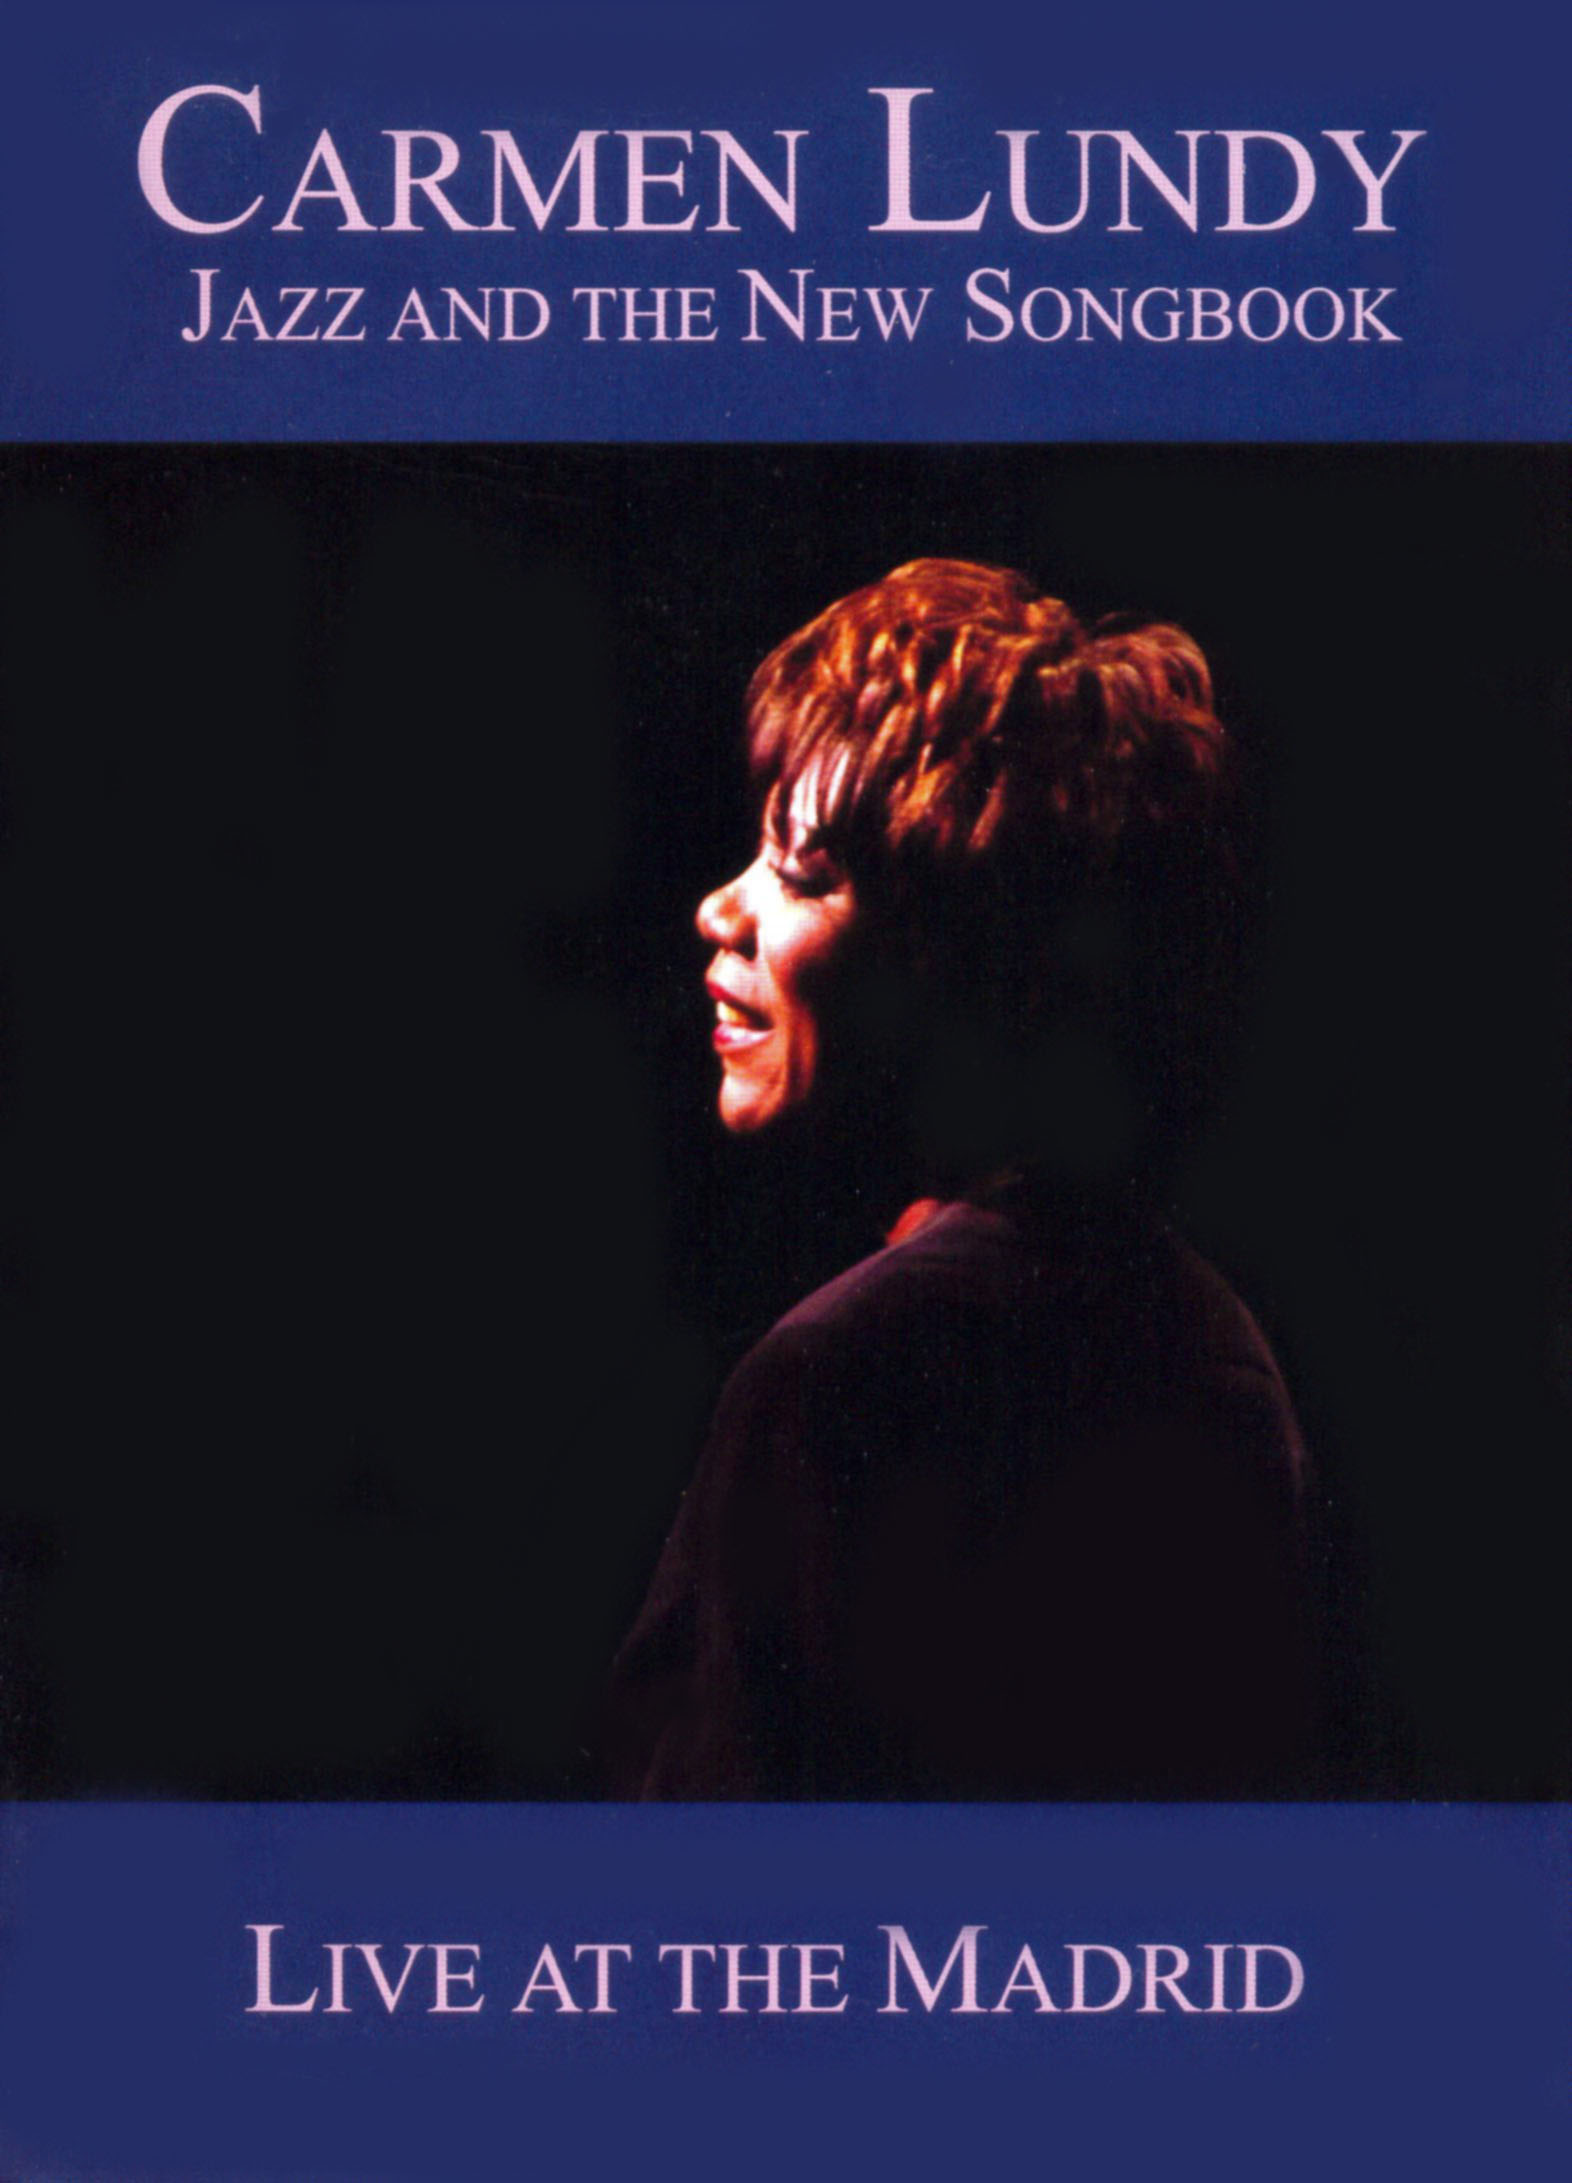 

Carmen Lundy: Jazz and the New Songbook - Live at the Madrid [DVD]